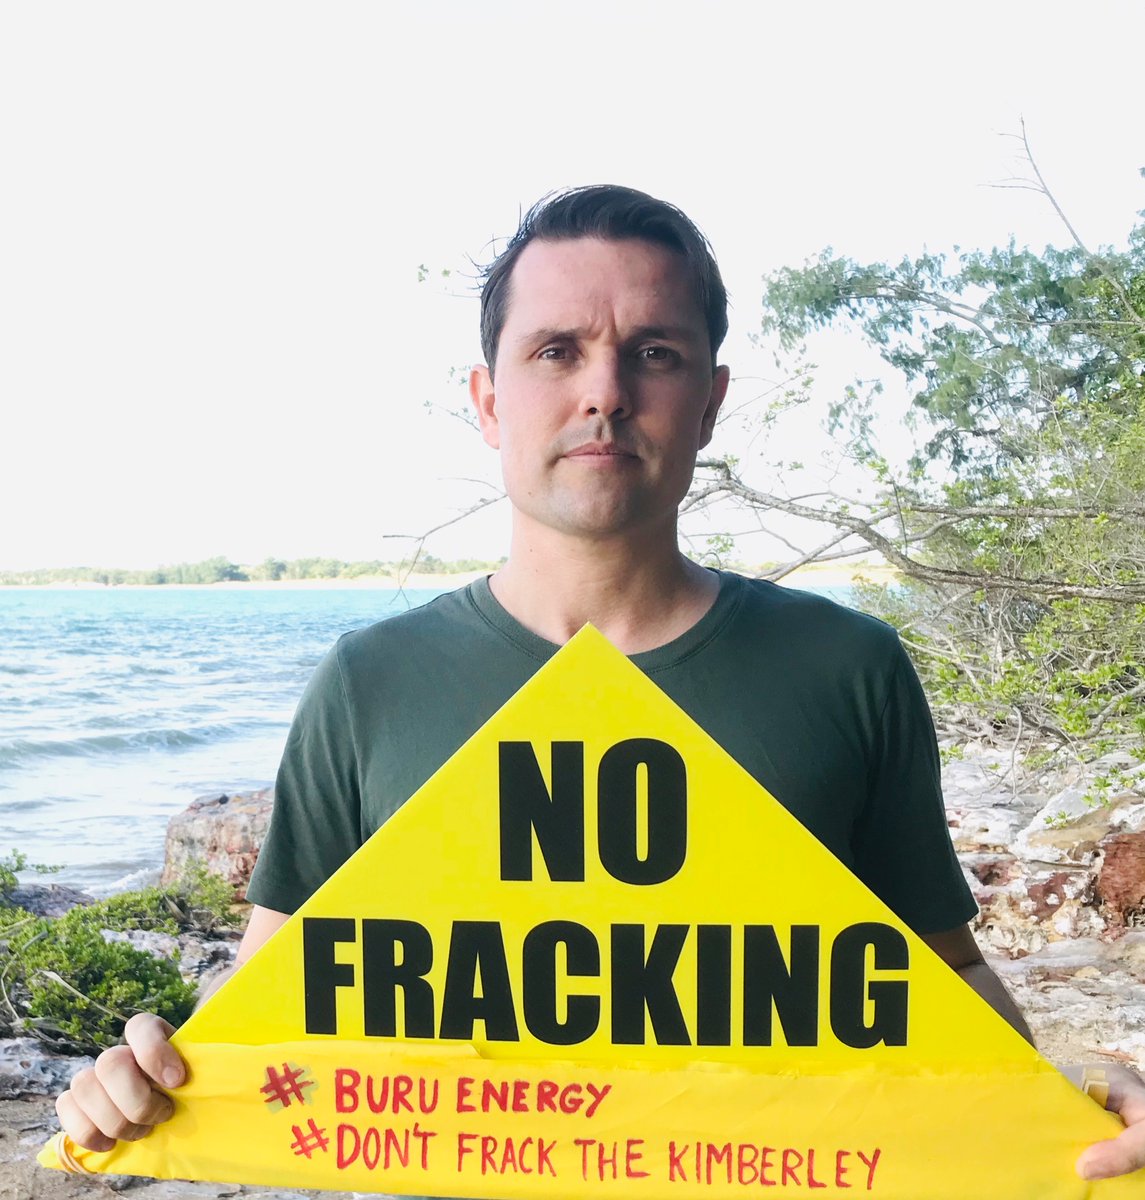 Hoping gas company BuruEnergy makes the right decision this week and finally cancel their fracking projects at their AGM 

#BuruEnergy
#dontfrackthekimberley 
#FrackfreeWA